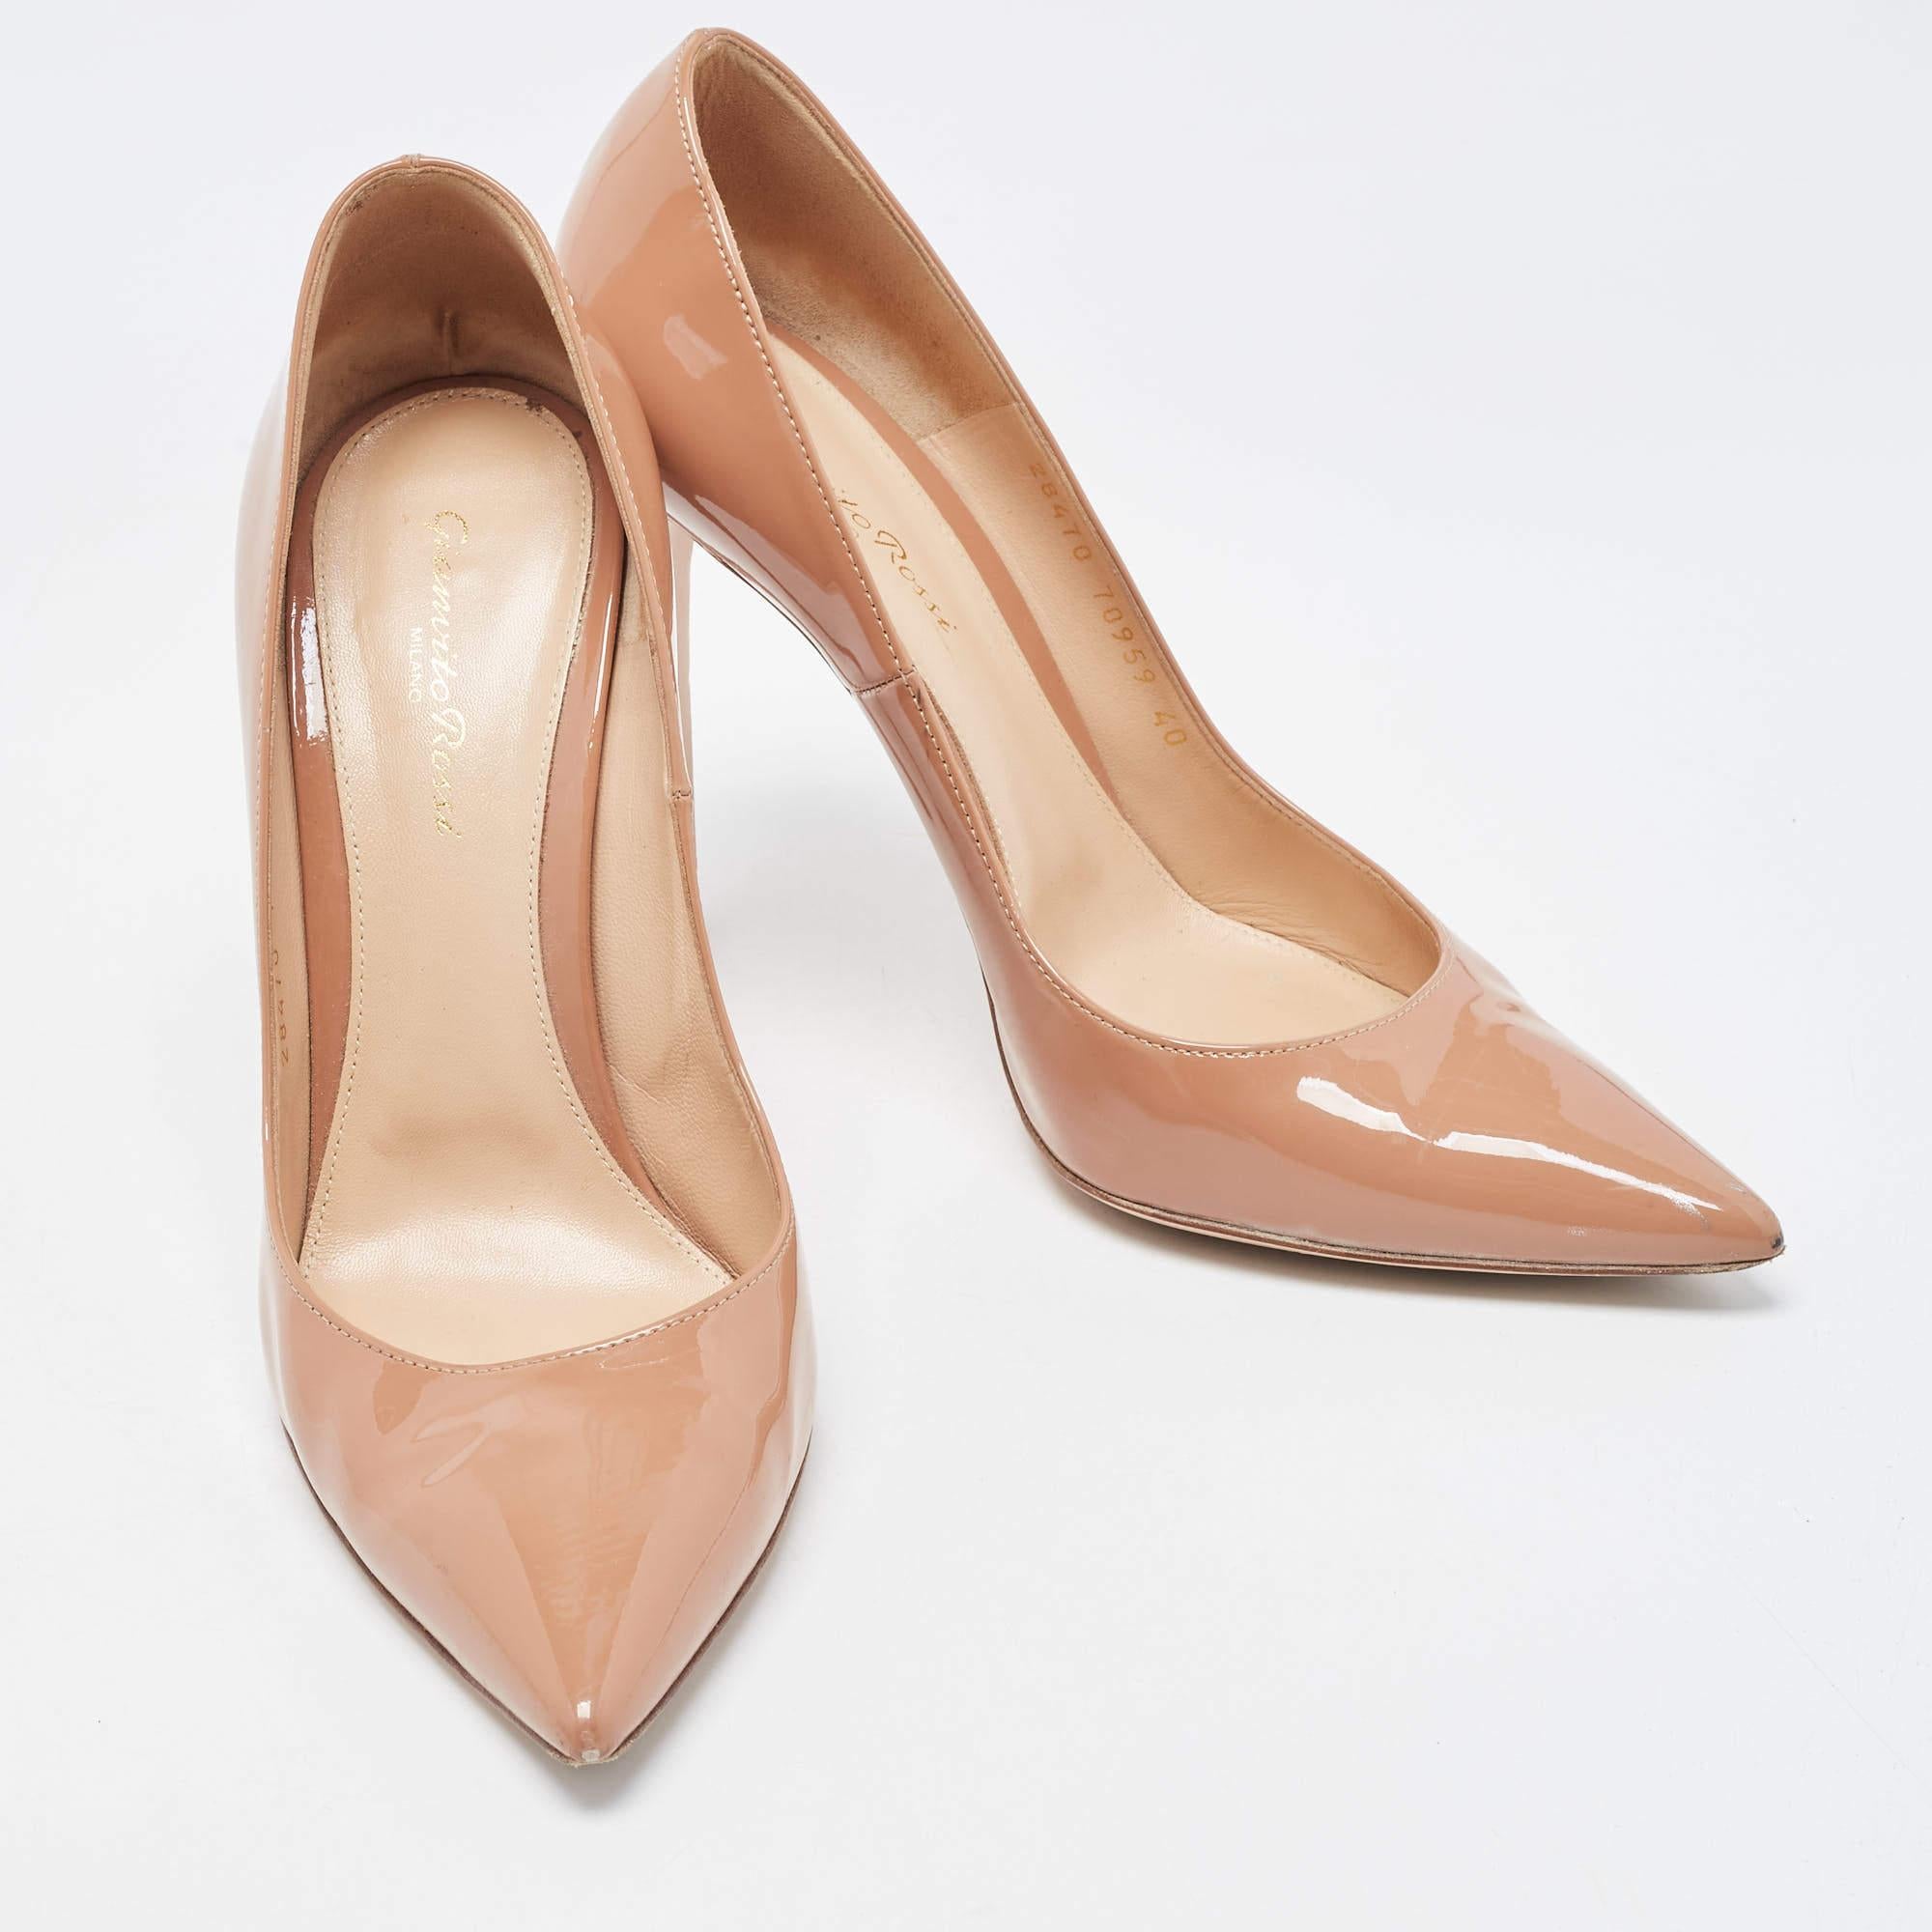 Gianvito Rossi Beige Patent Pointed Toe Pumps Size 40 For Sale 1